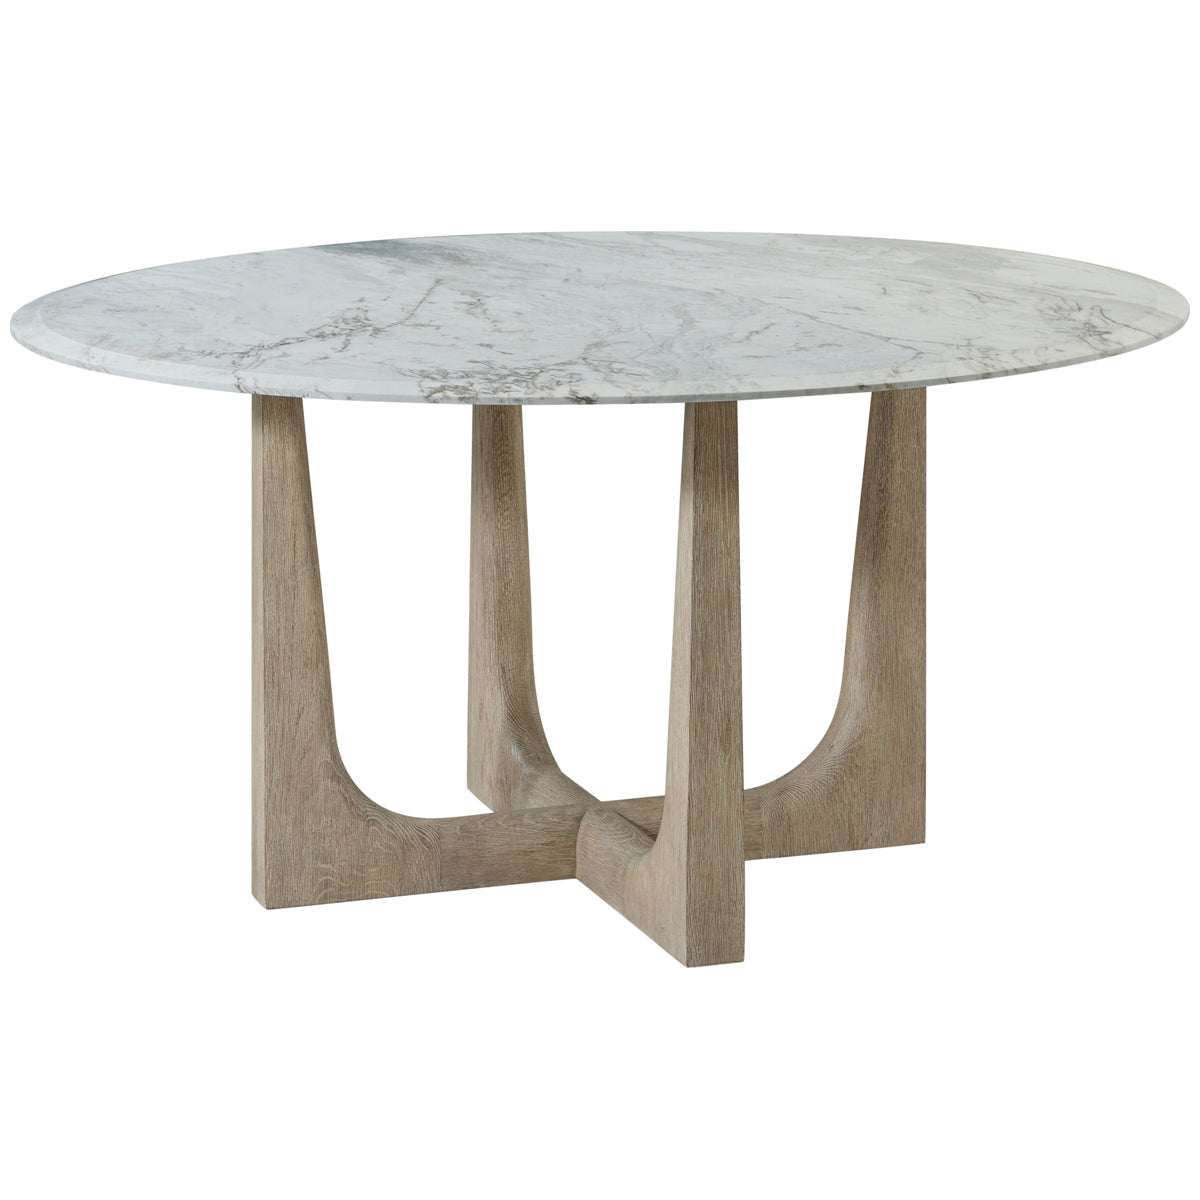 Theodore Alexander Repose Marble Round Dining Table